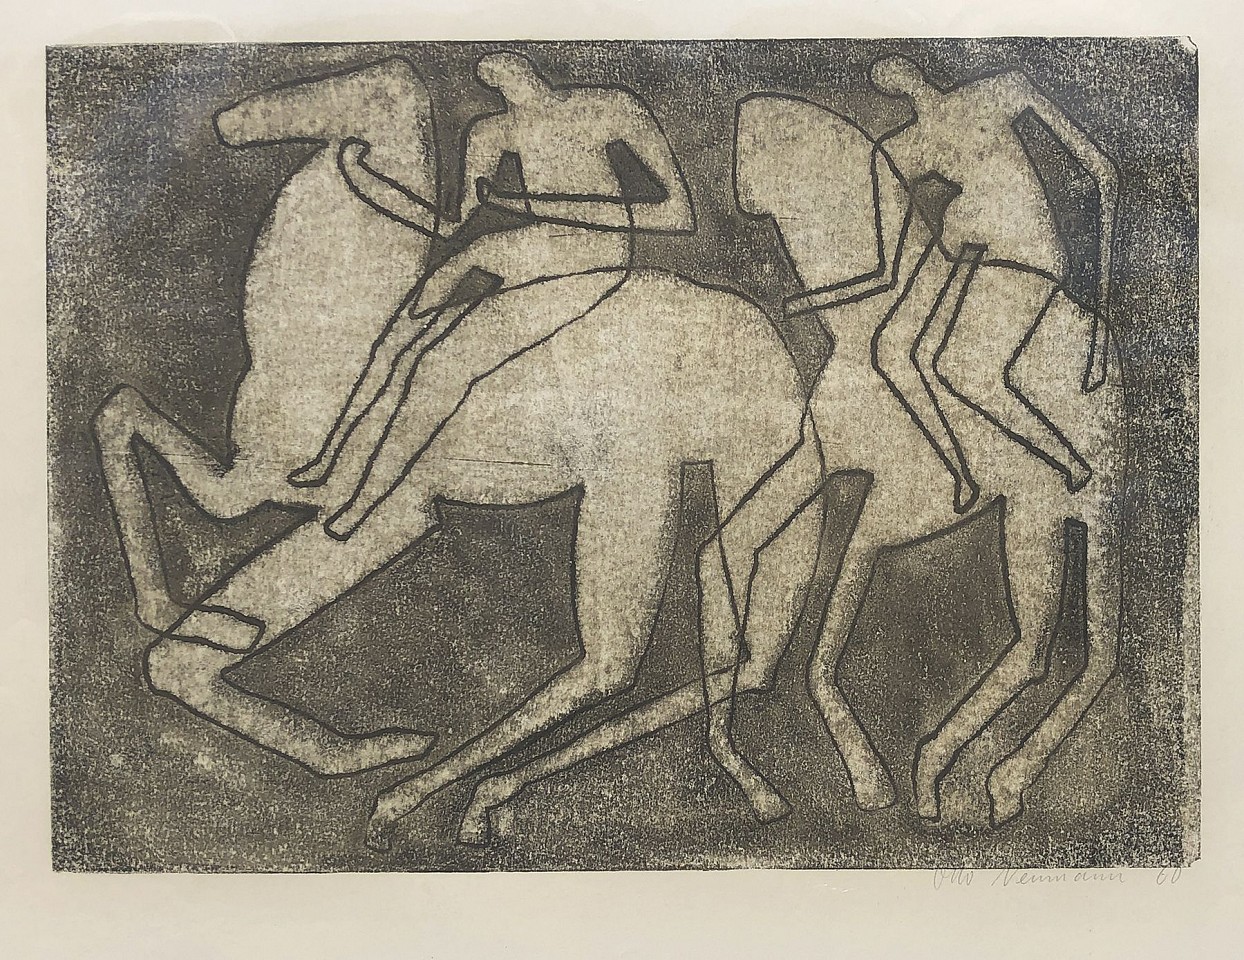 Otto Neumann 1895-1975, Abstract Horses and Riders, 1960
monotype on paper, 17.75"x 24.75",26" x 33" framed 
OT 045043
Price Upon Request